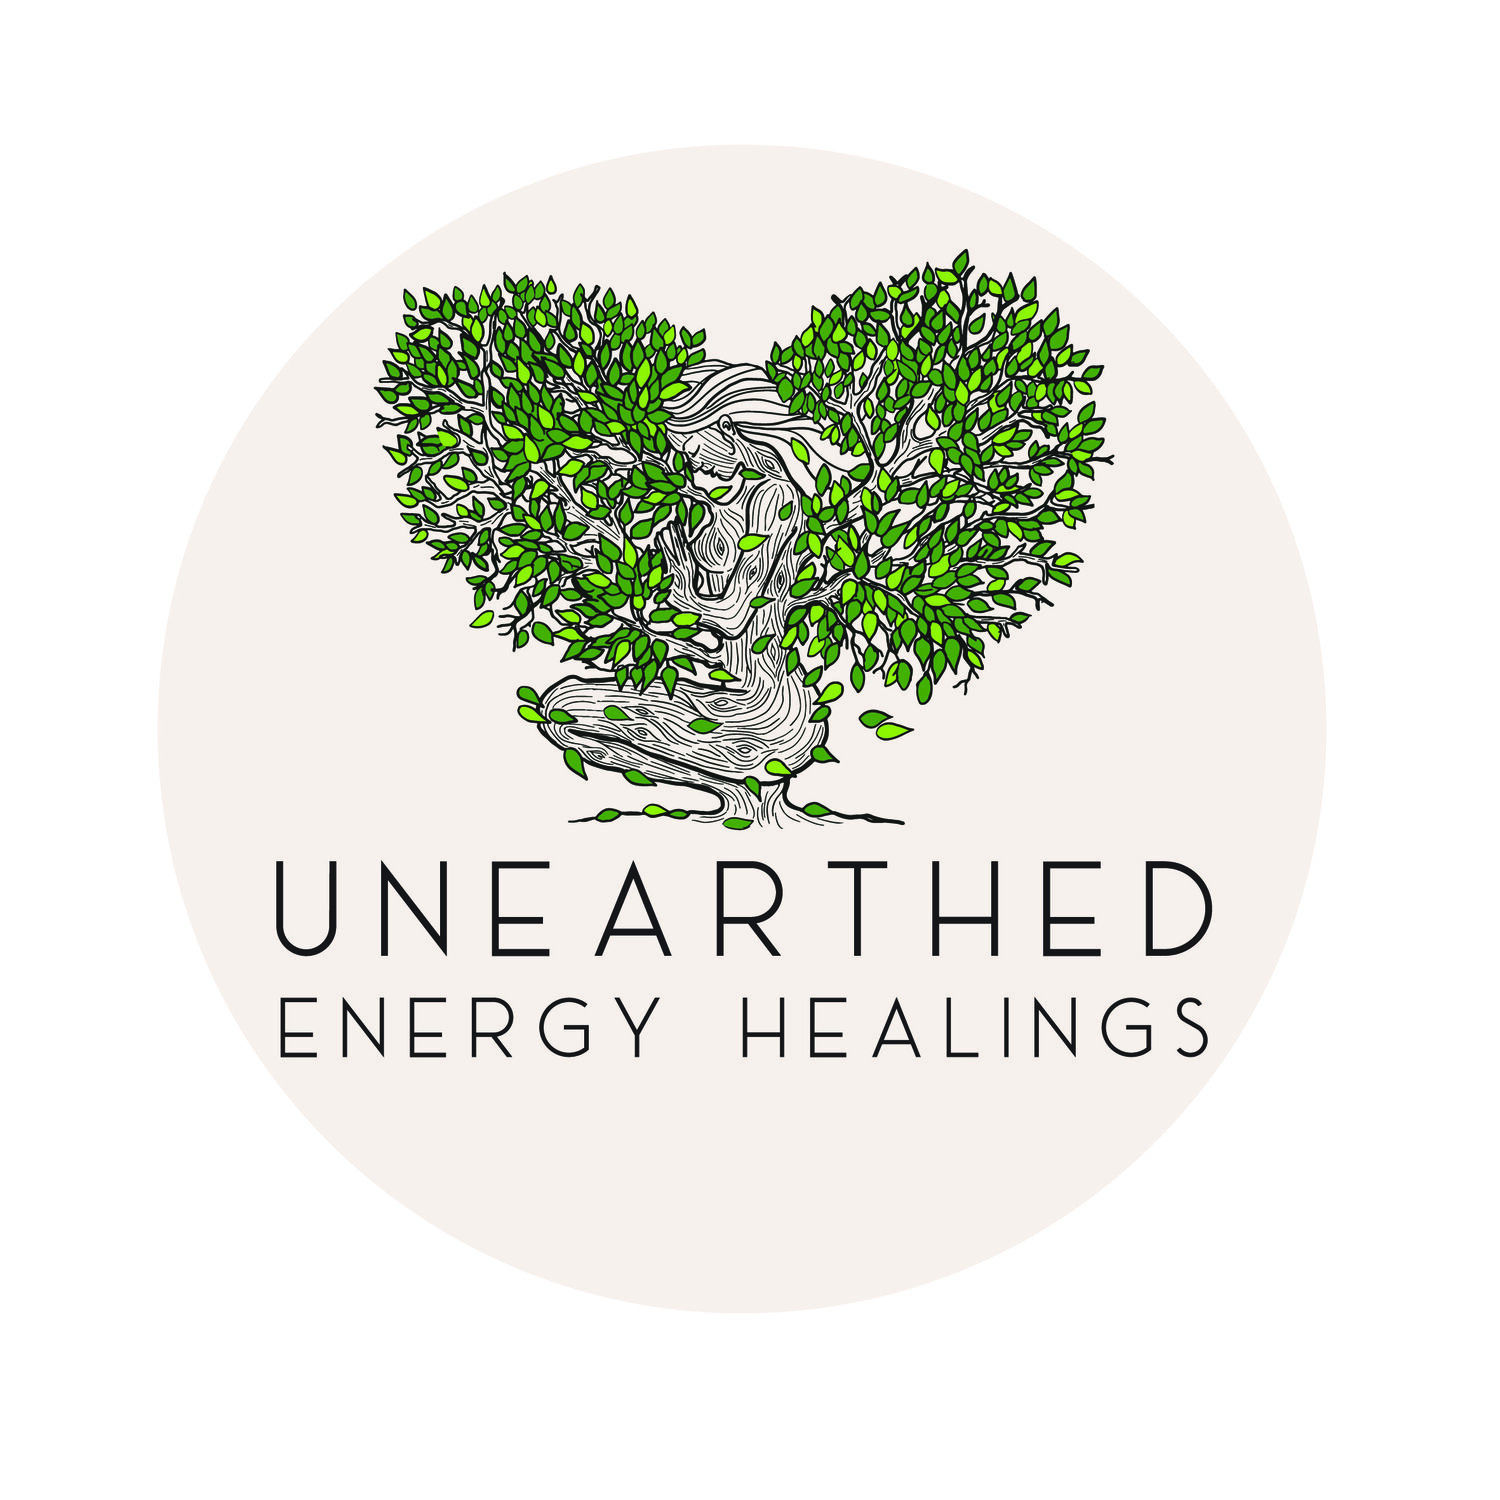 Unearthed Energy Healings